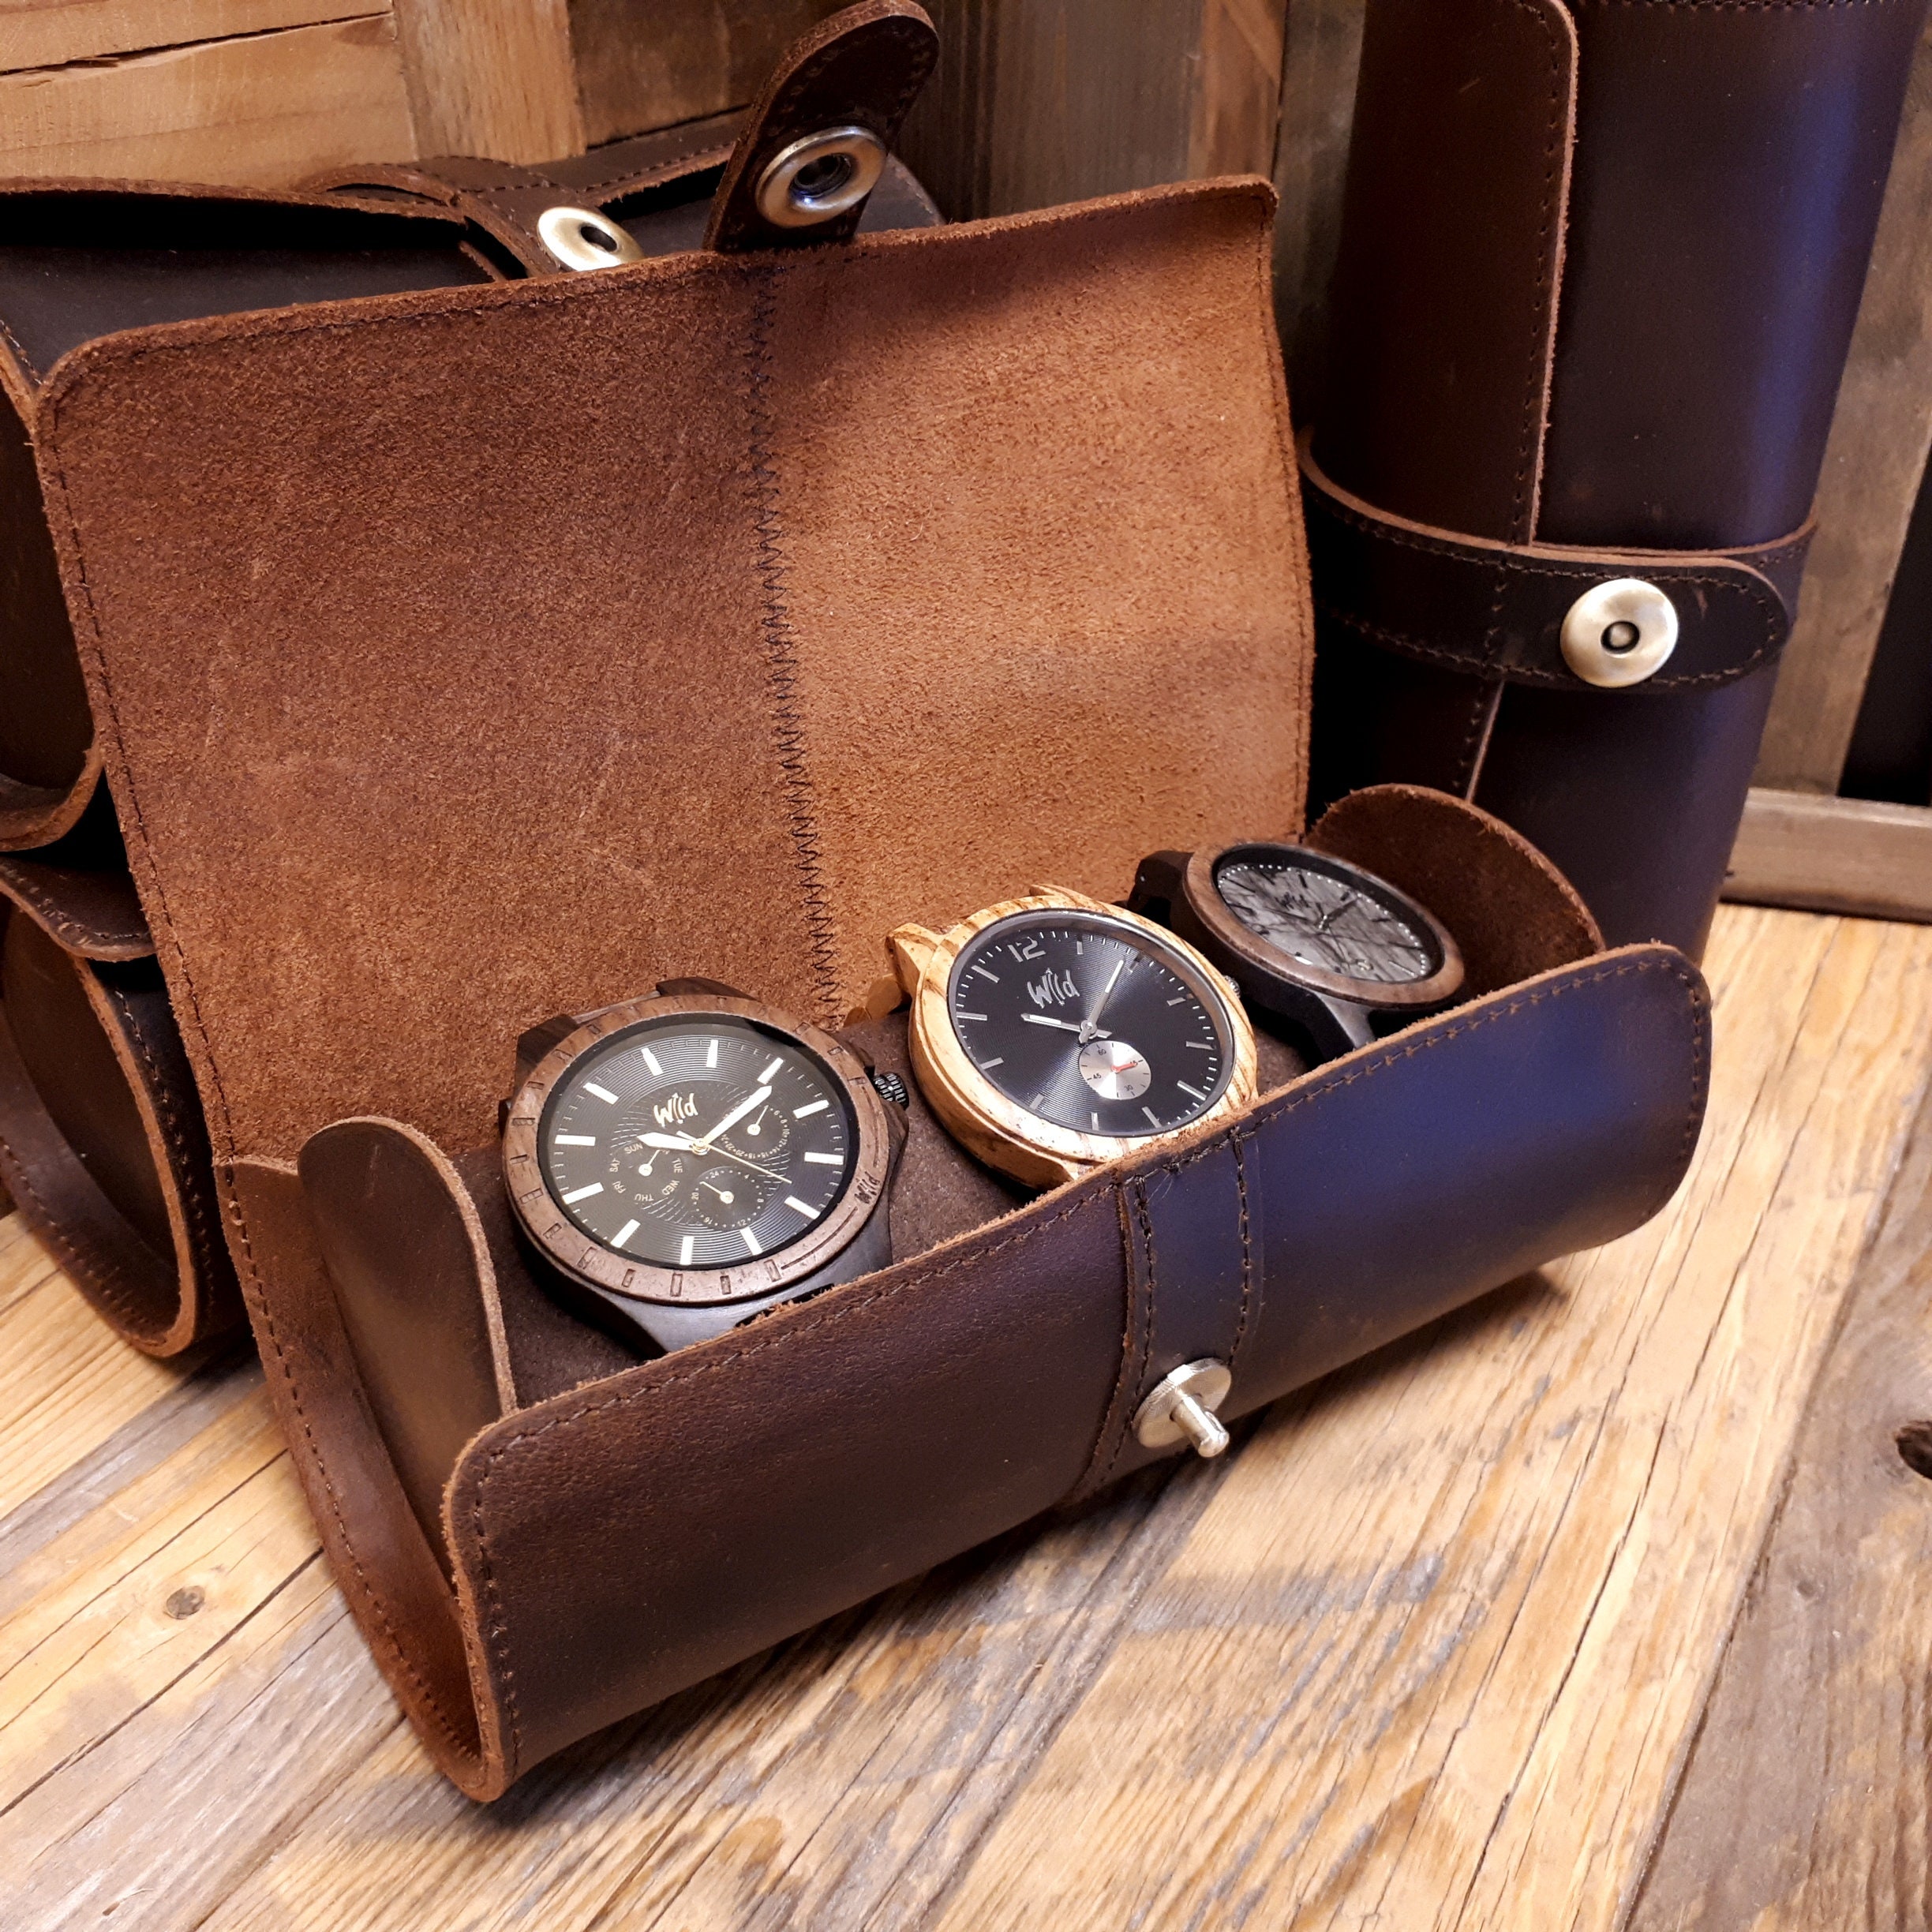  Personalized Watch Case for Men and Women, Customized PU  Leather Travel Watch Case Roll Organizer For Dad, Engraved Name,  Handcrafted Gift for Grandpa, Boy Friend, Watch Collector, Father's Day  Gifts 